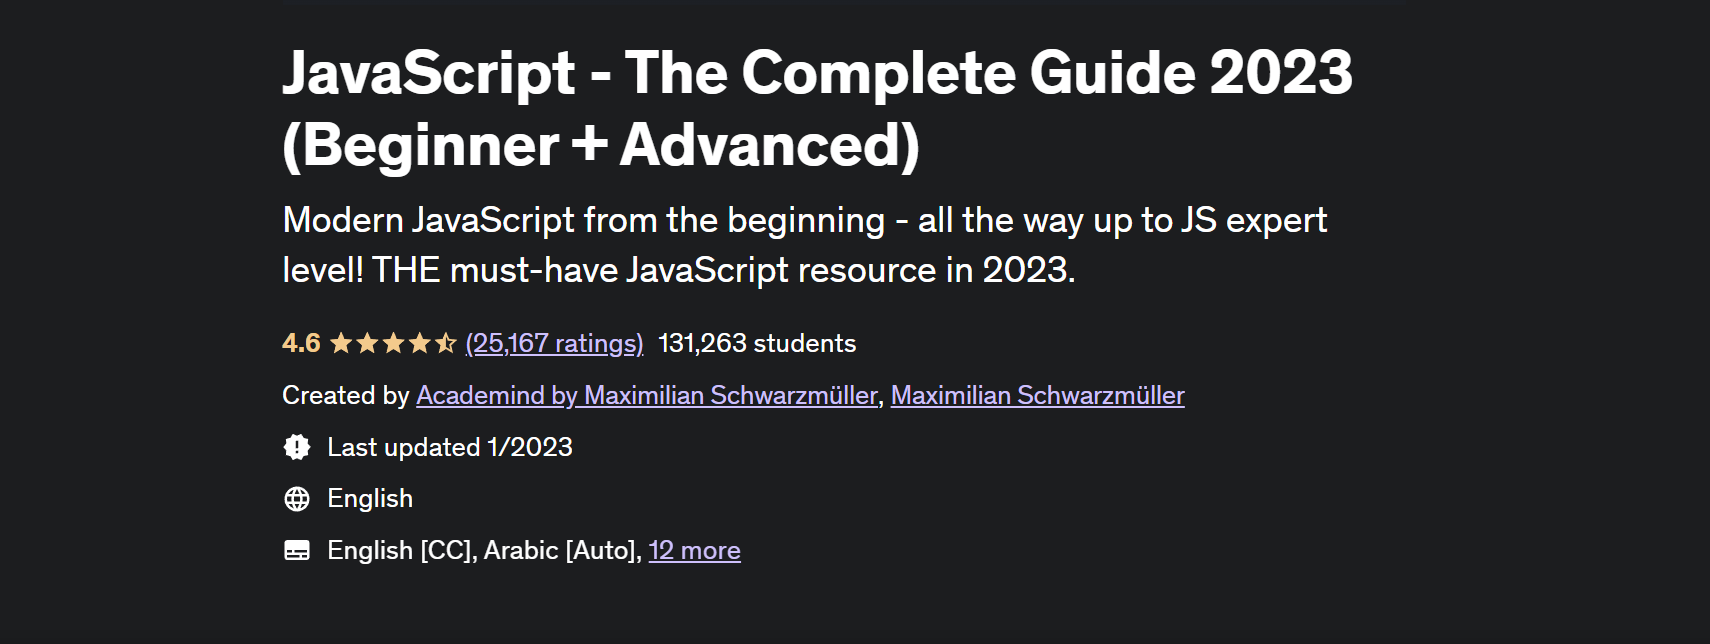 JavaScript - The Complete Guide 2023